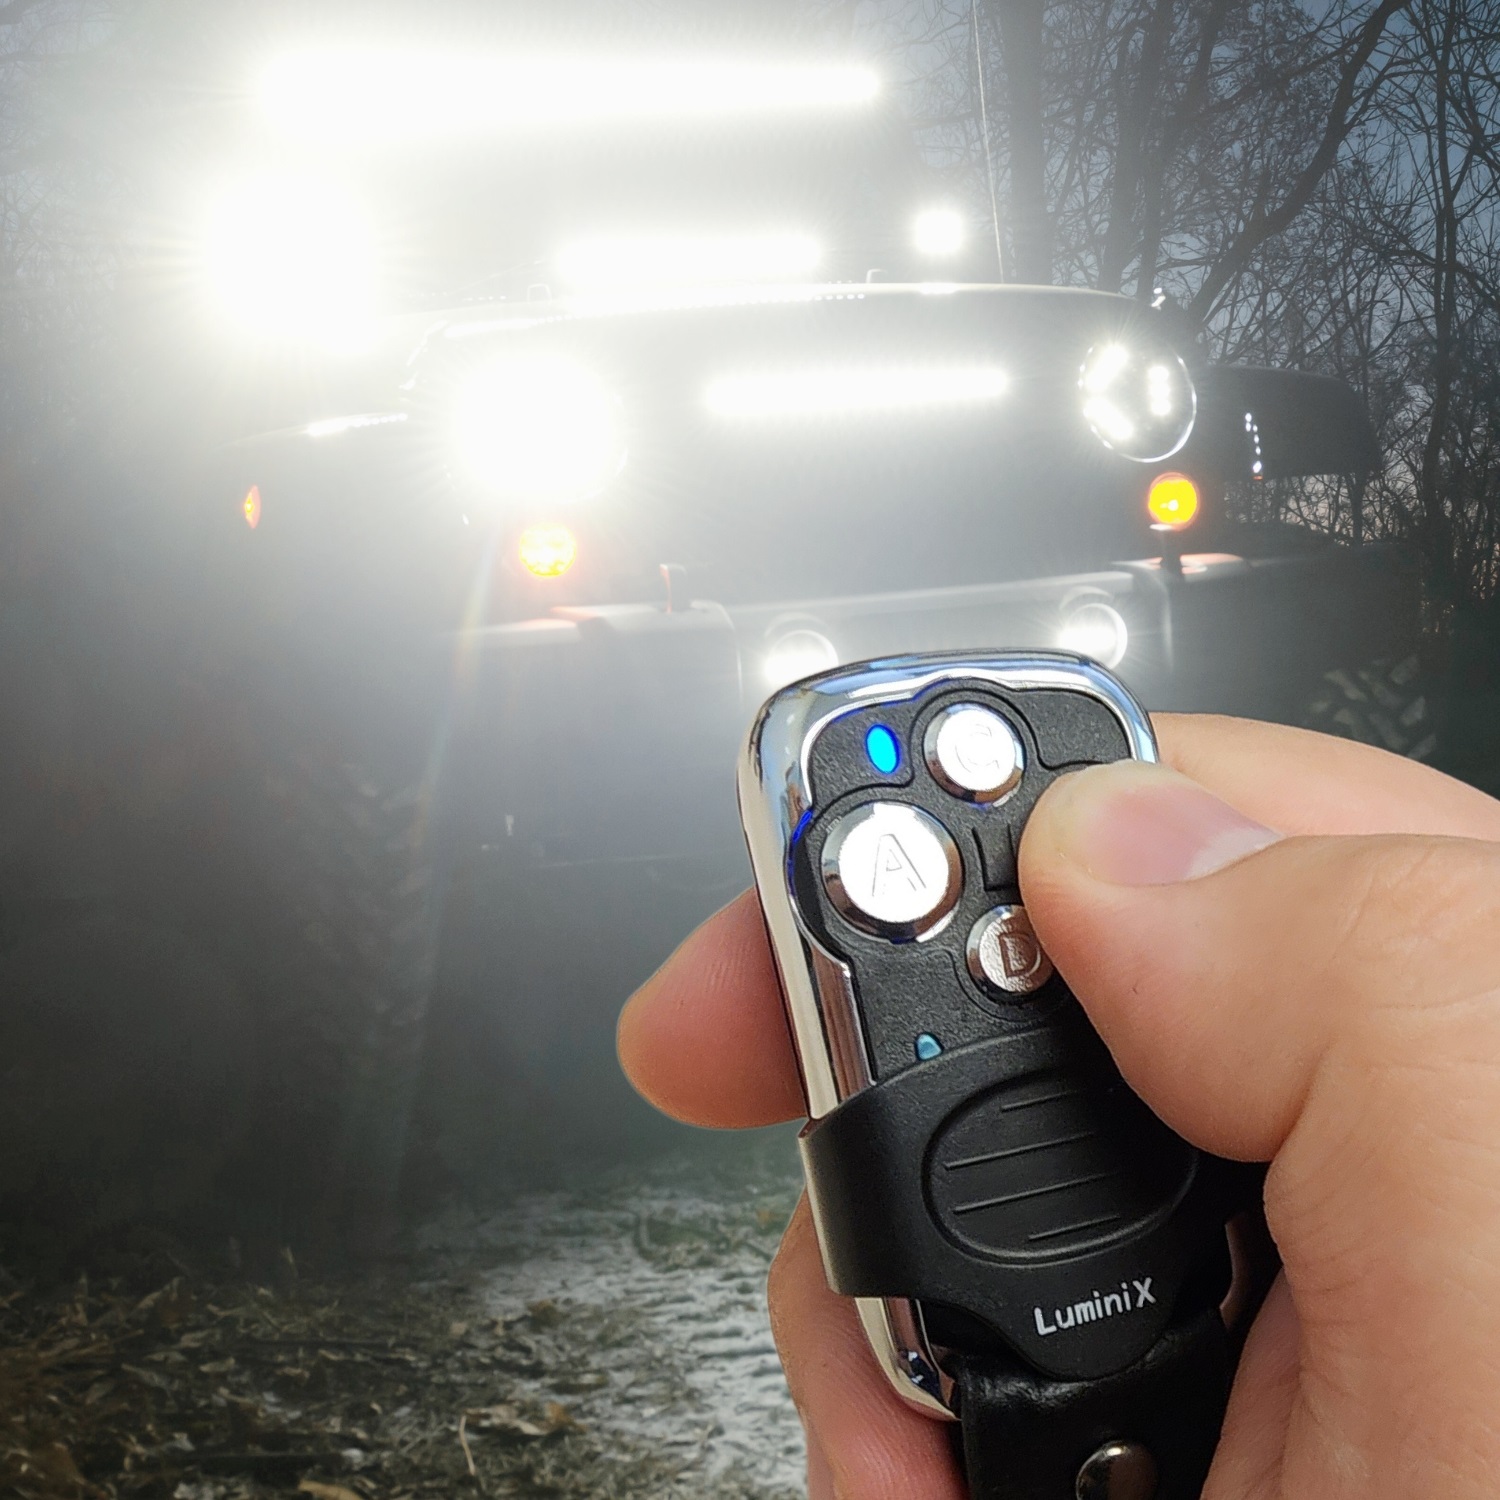 https://www.putco.com/wp-content/uploads/Enhance-Your-Off-Roading-Experience-with-Putco-Luminix-Wireless-Remote-The-Perfect-Partner-for-High-Power-LEDs.jpg